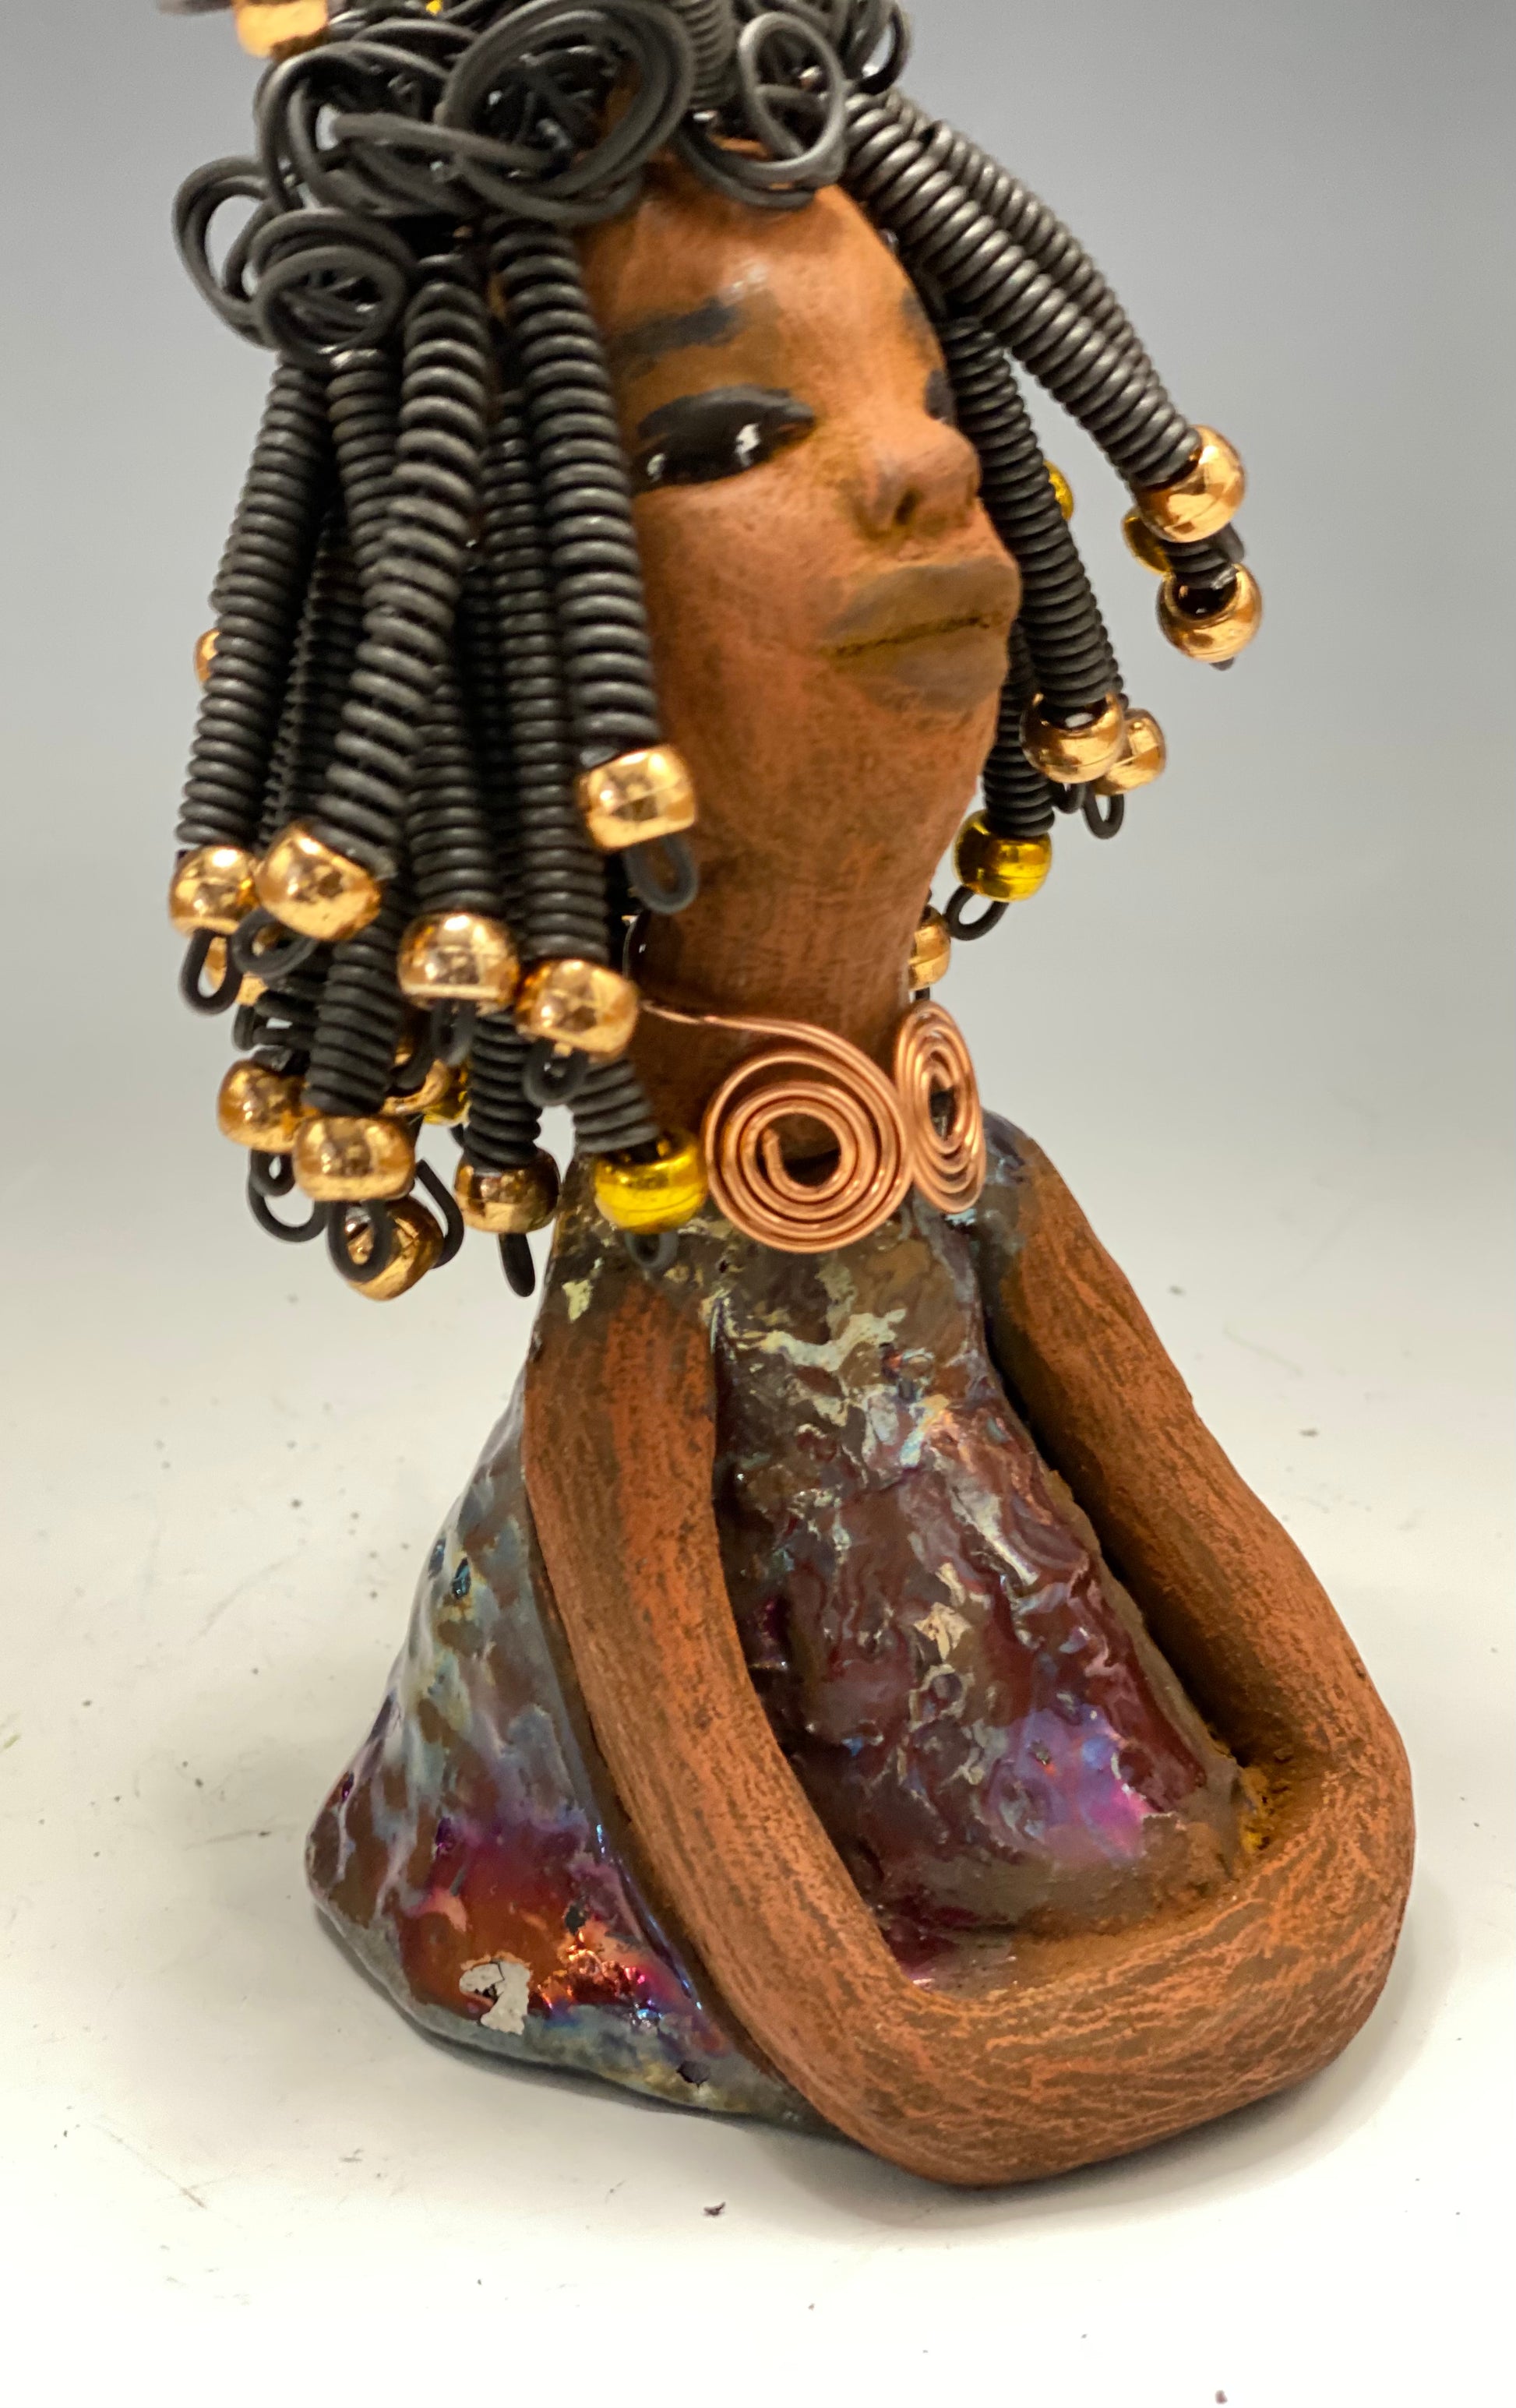   Meet Alexus  Alexus stands 7.5" x 4" x 4" and weighs 1.05 lbs. She wears a lovely glossy  metallic gold dress adorn by a spiral copper necklace. Alexus has over15 feet of coiled wire hair with gold beads.. Alexus appears to sit in a yoga pose. Her long arms rest at her side. Alexus is a great starter piece from the Herdew Collection!